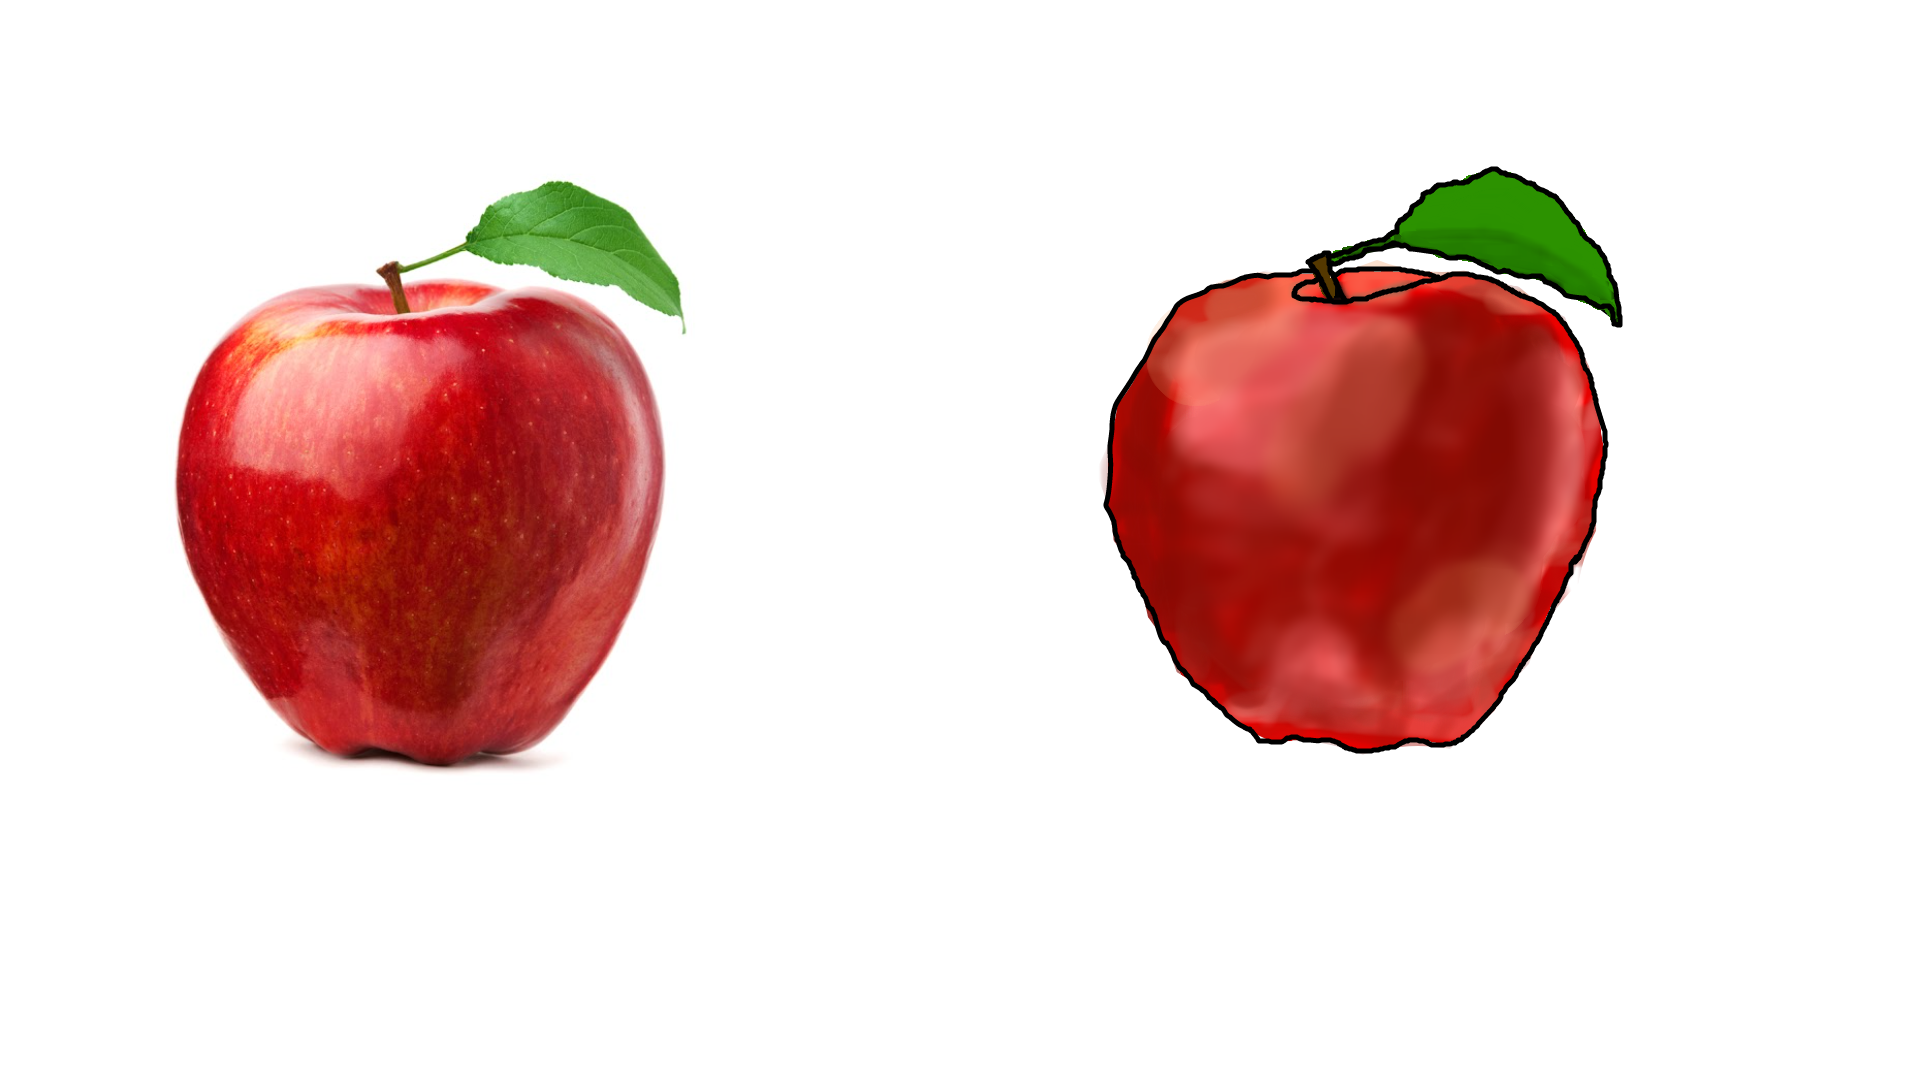 Apple - created by Tawfiq with paint